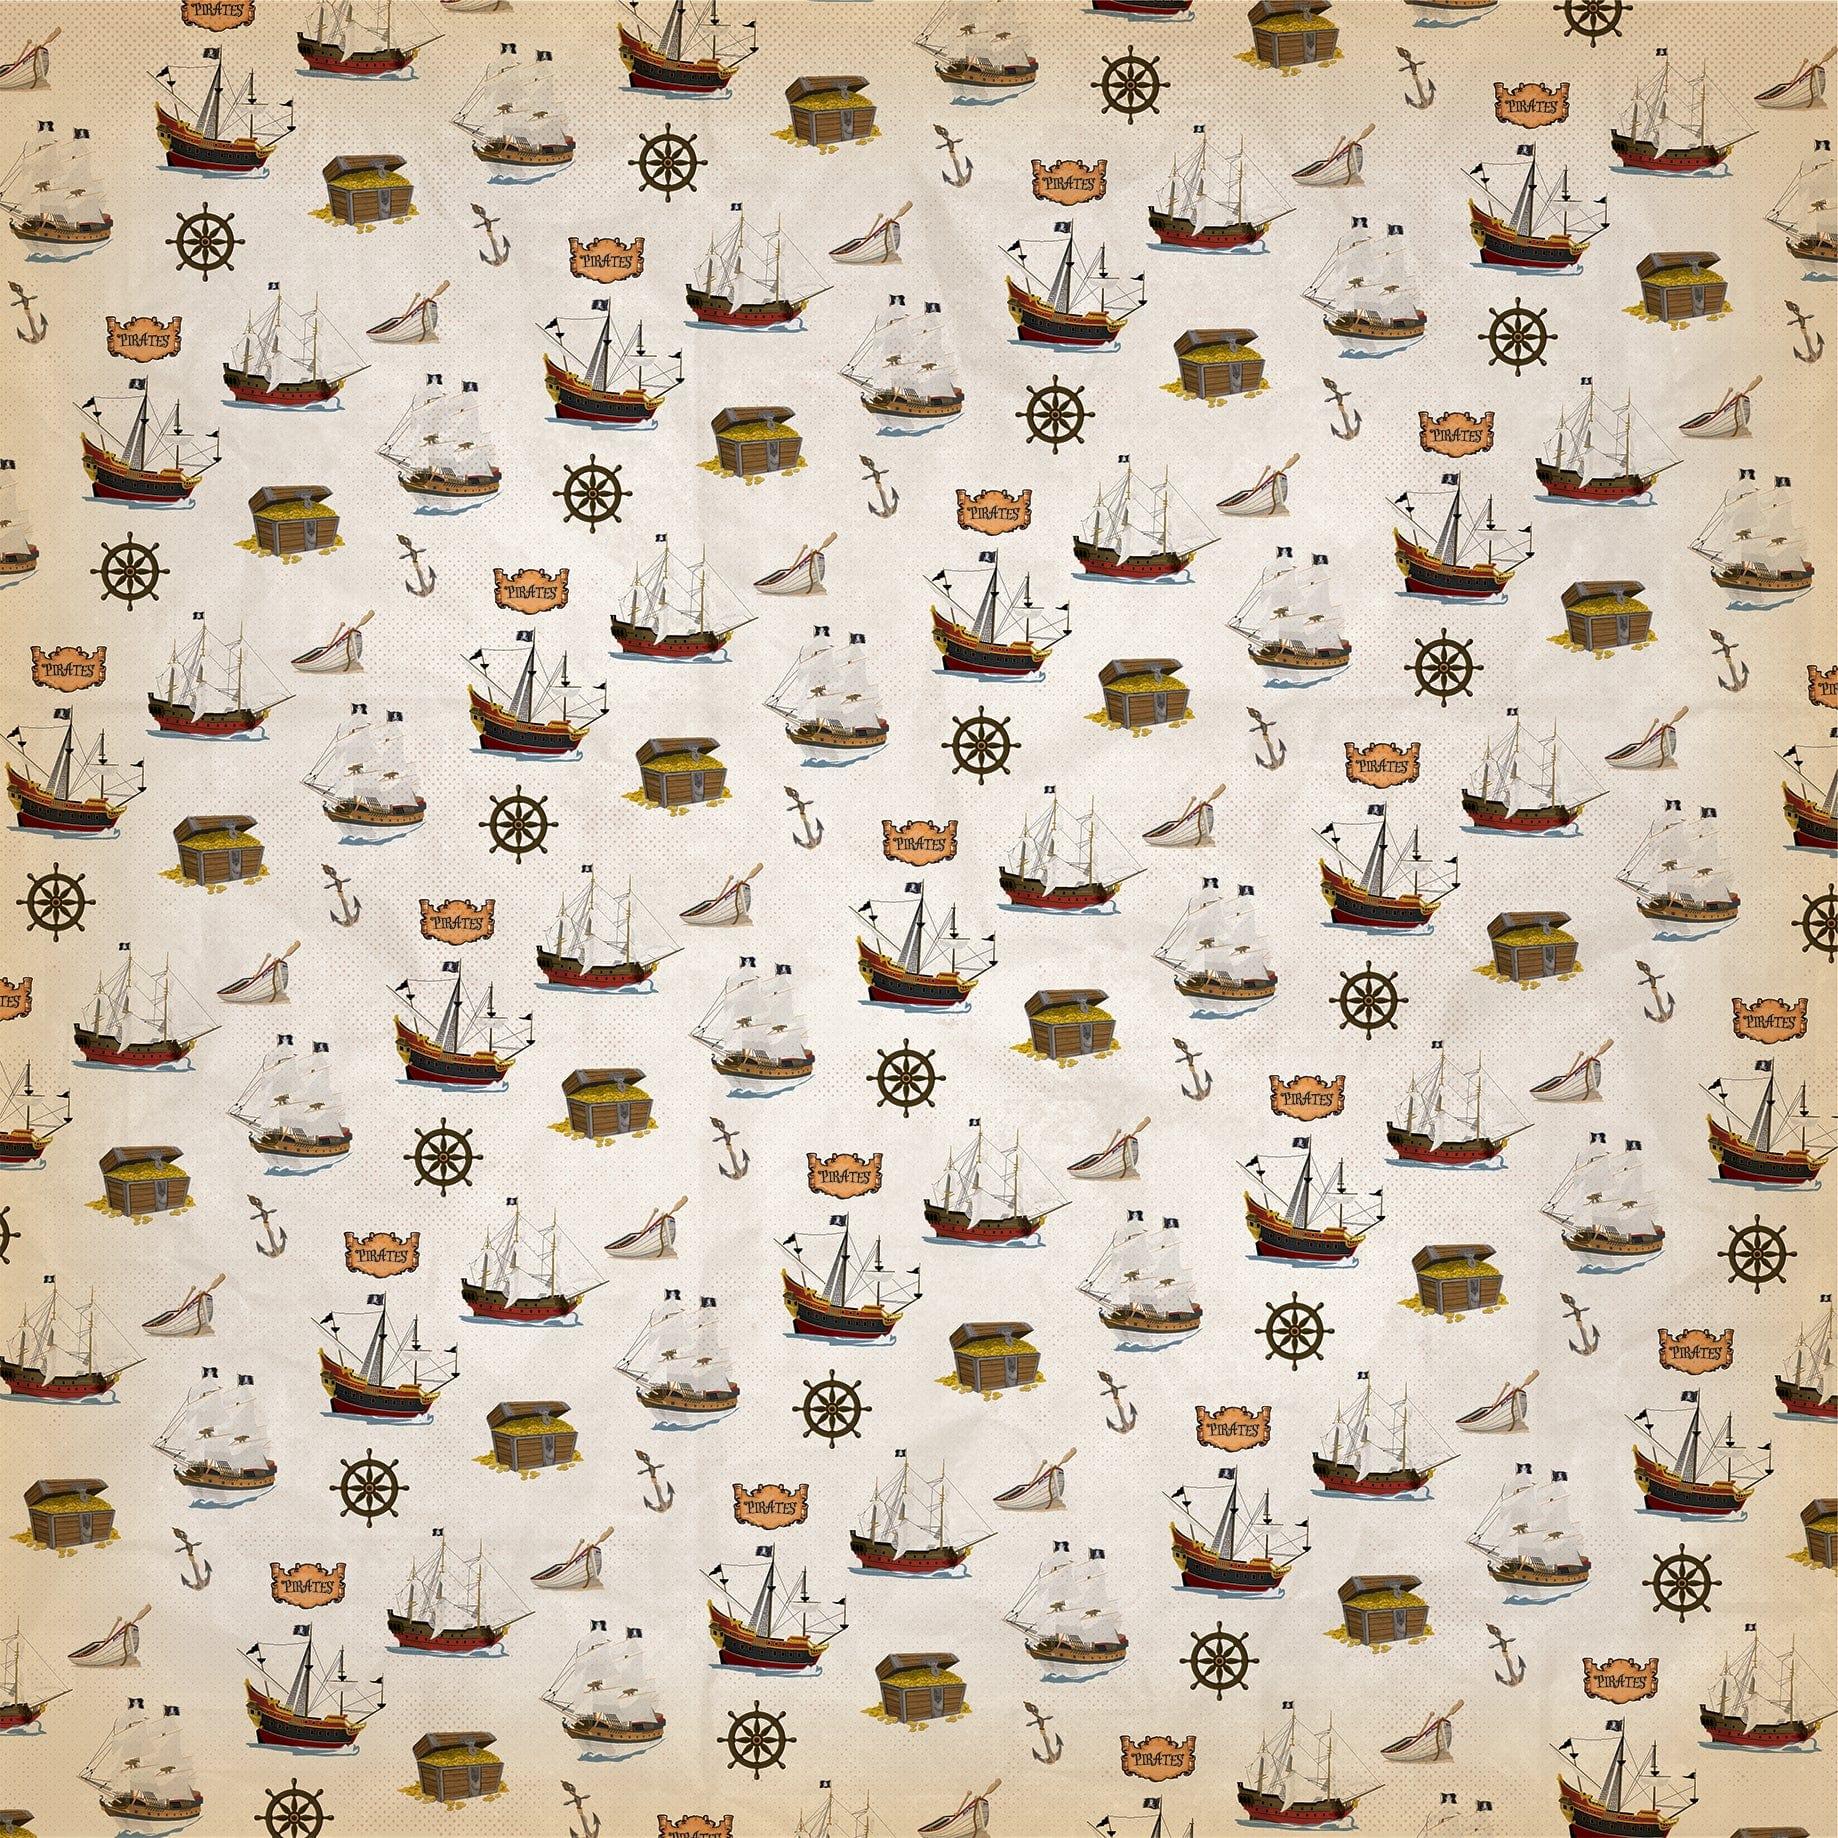 Pirates Collection Abandon Ship 12 x 12 Double-Sided Scrapbook Paper by Carta Bella - Scrapbook Supply Companies